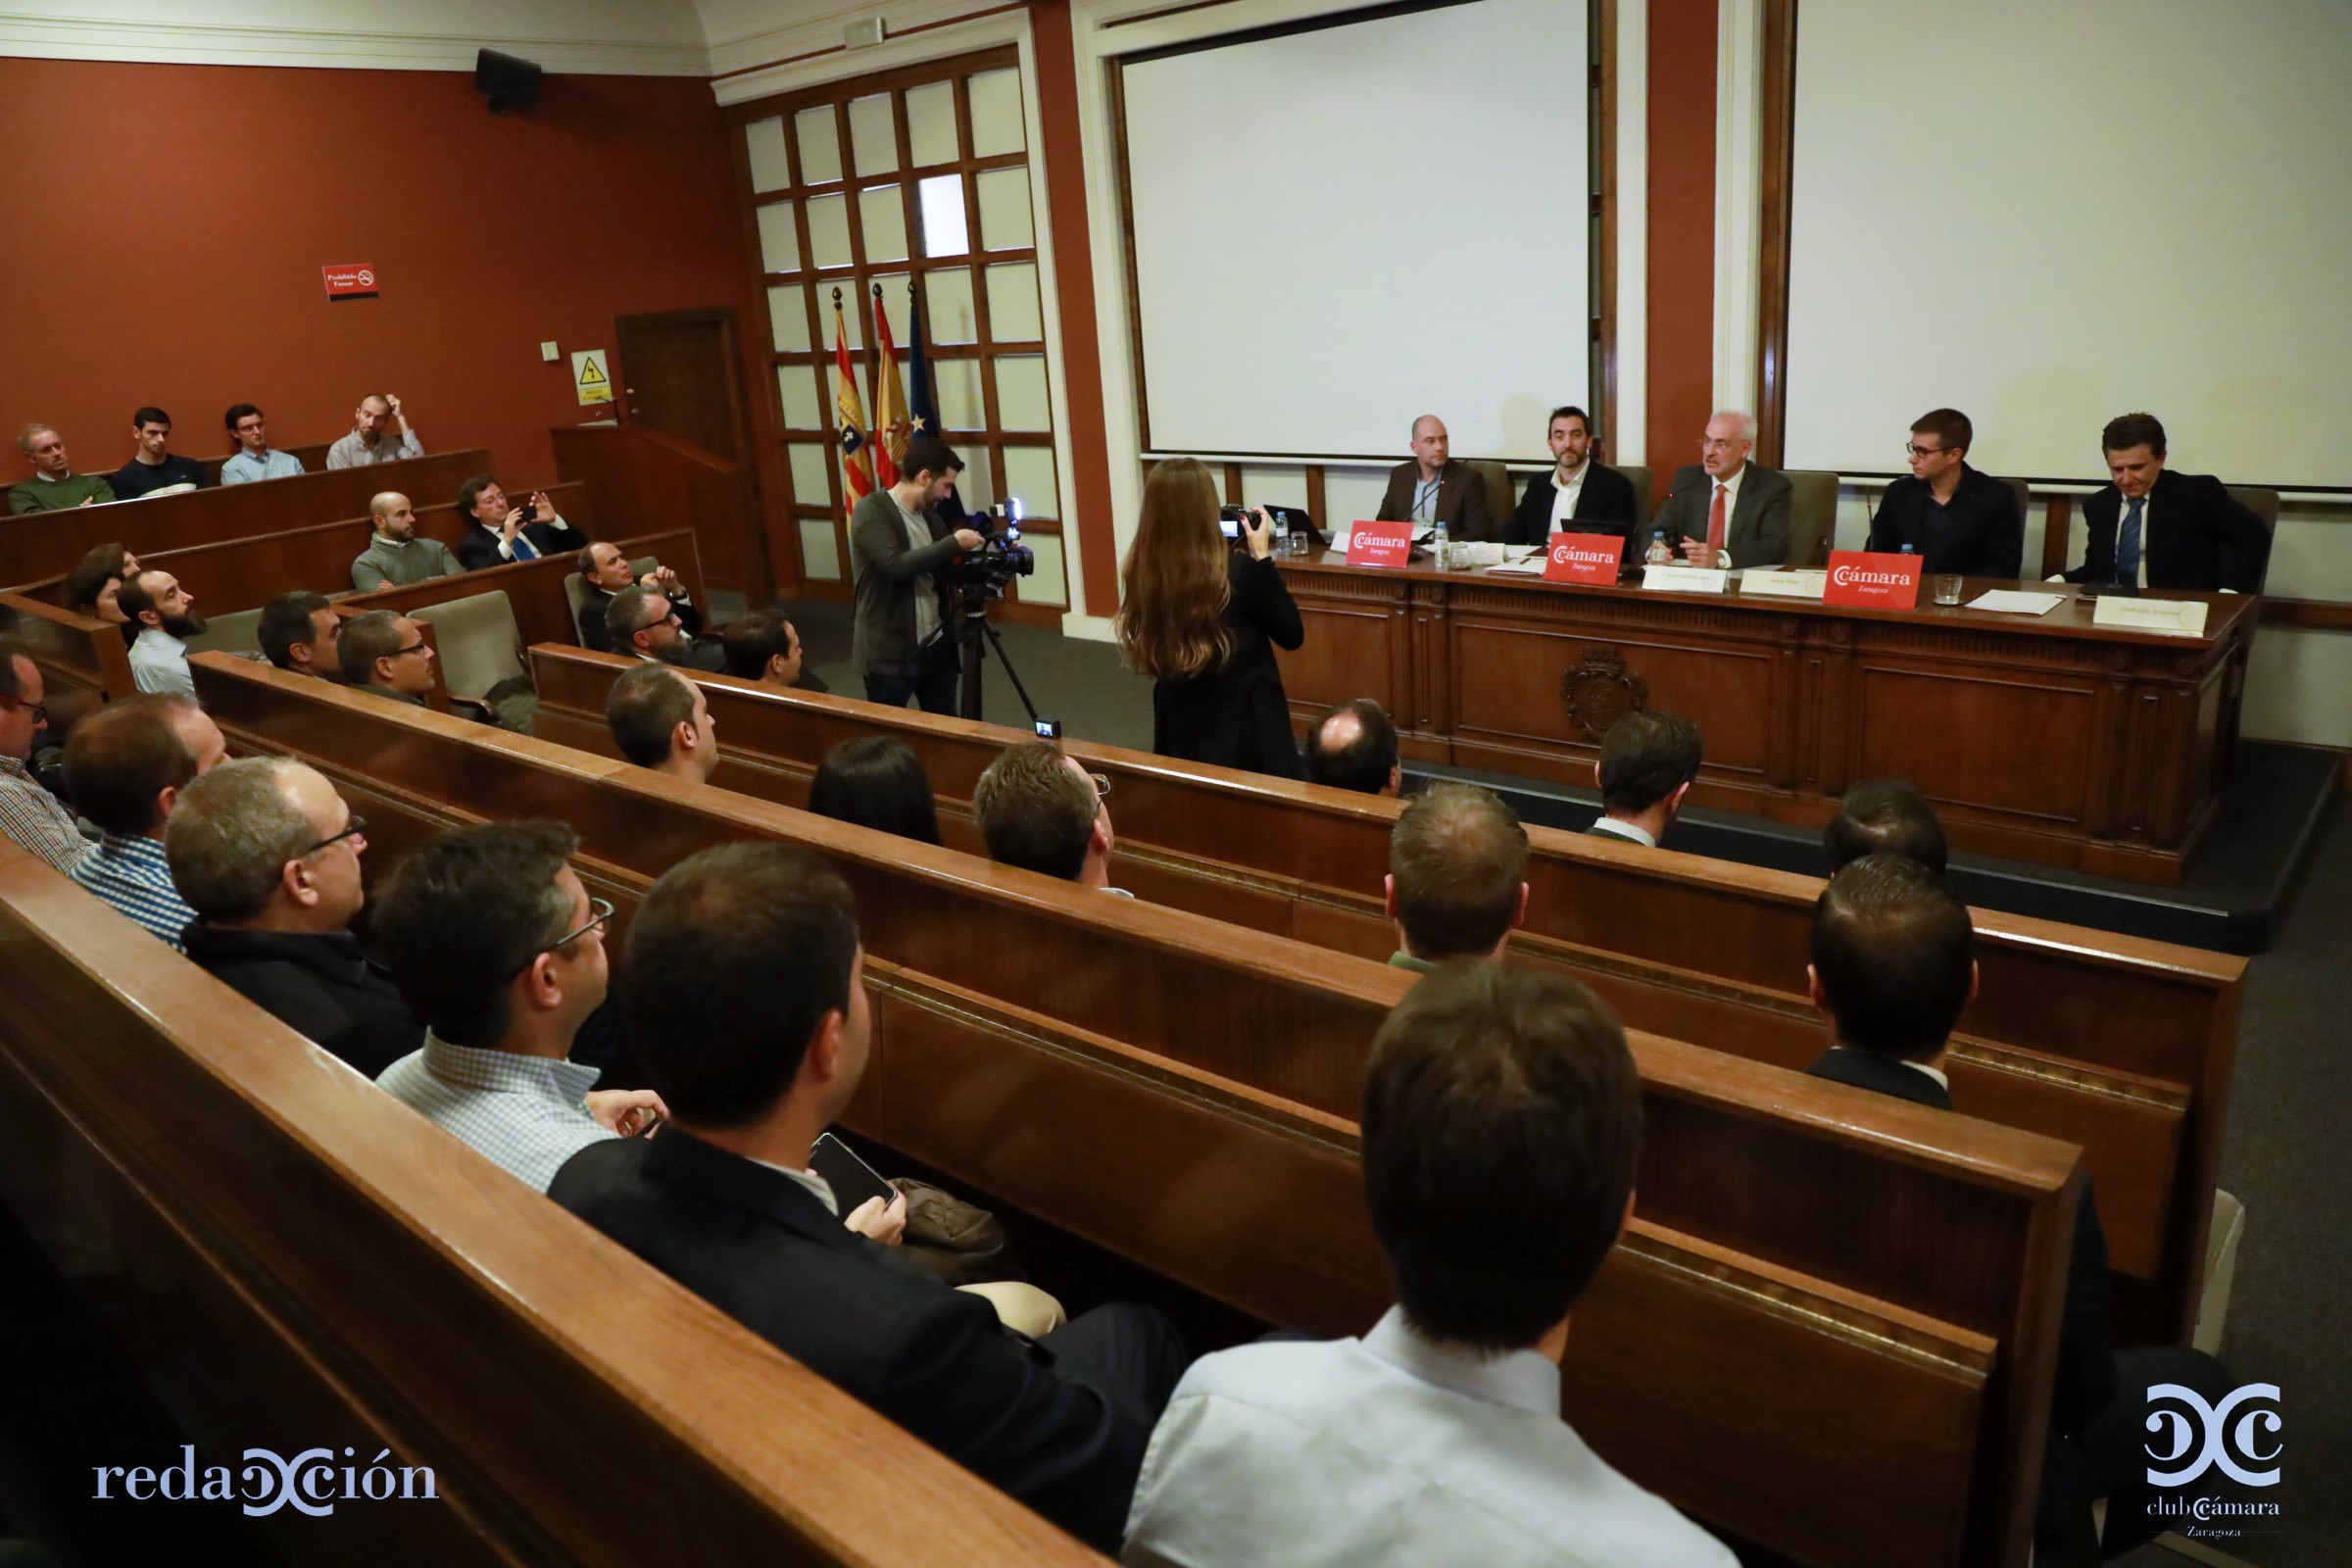 Chamber of Zaragoza event of industrial processes optimization